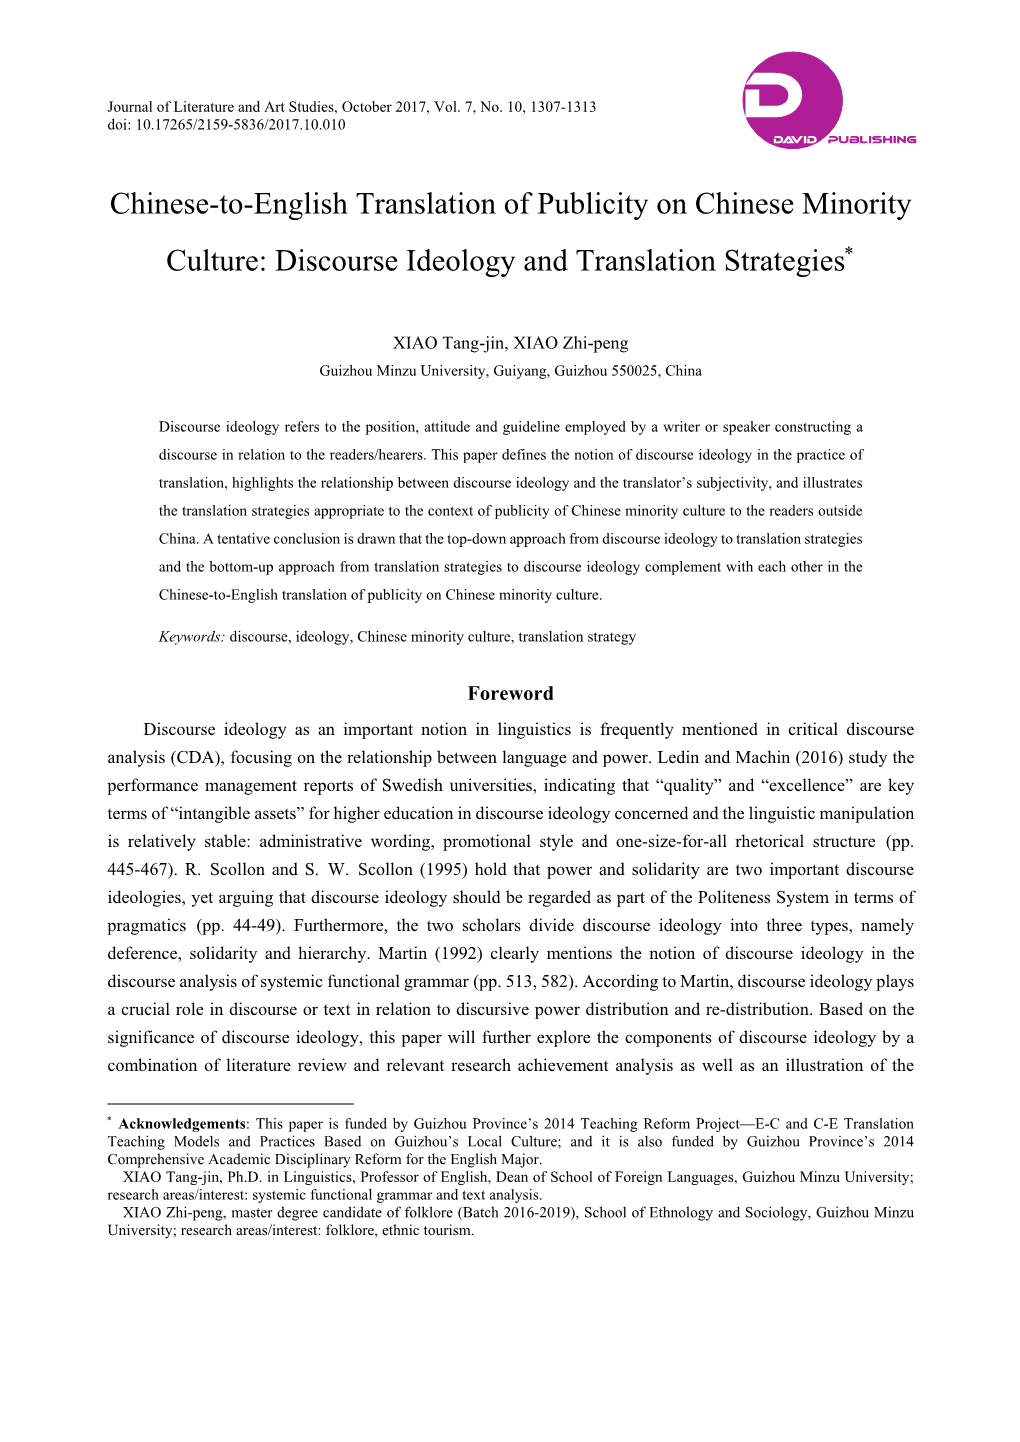 Chinese-To-English Translation of Publicity on Chinese Minority Culture: Discourse Ideology and Translation Strategies